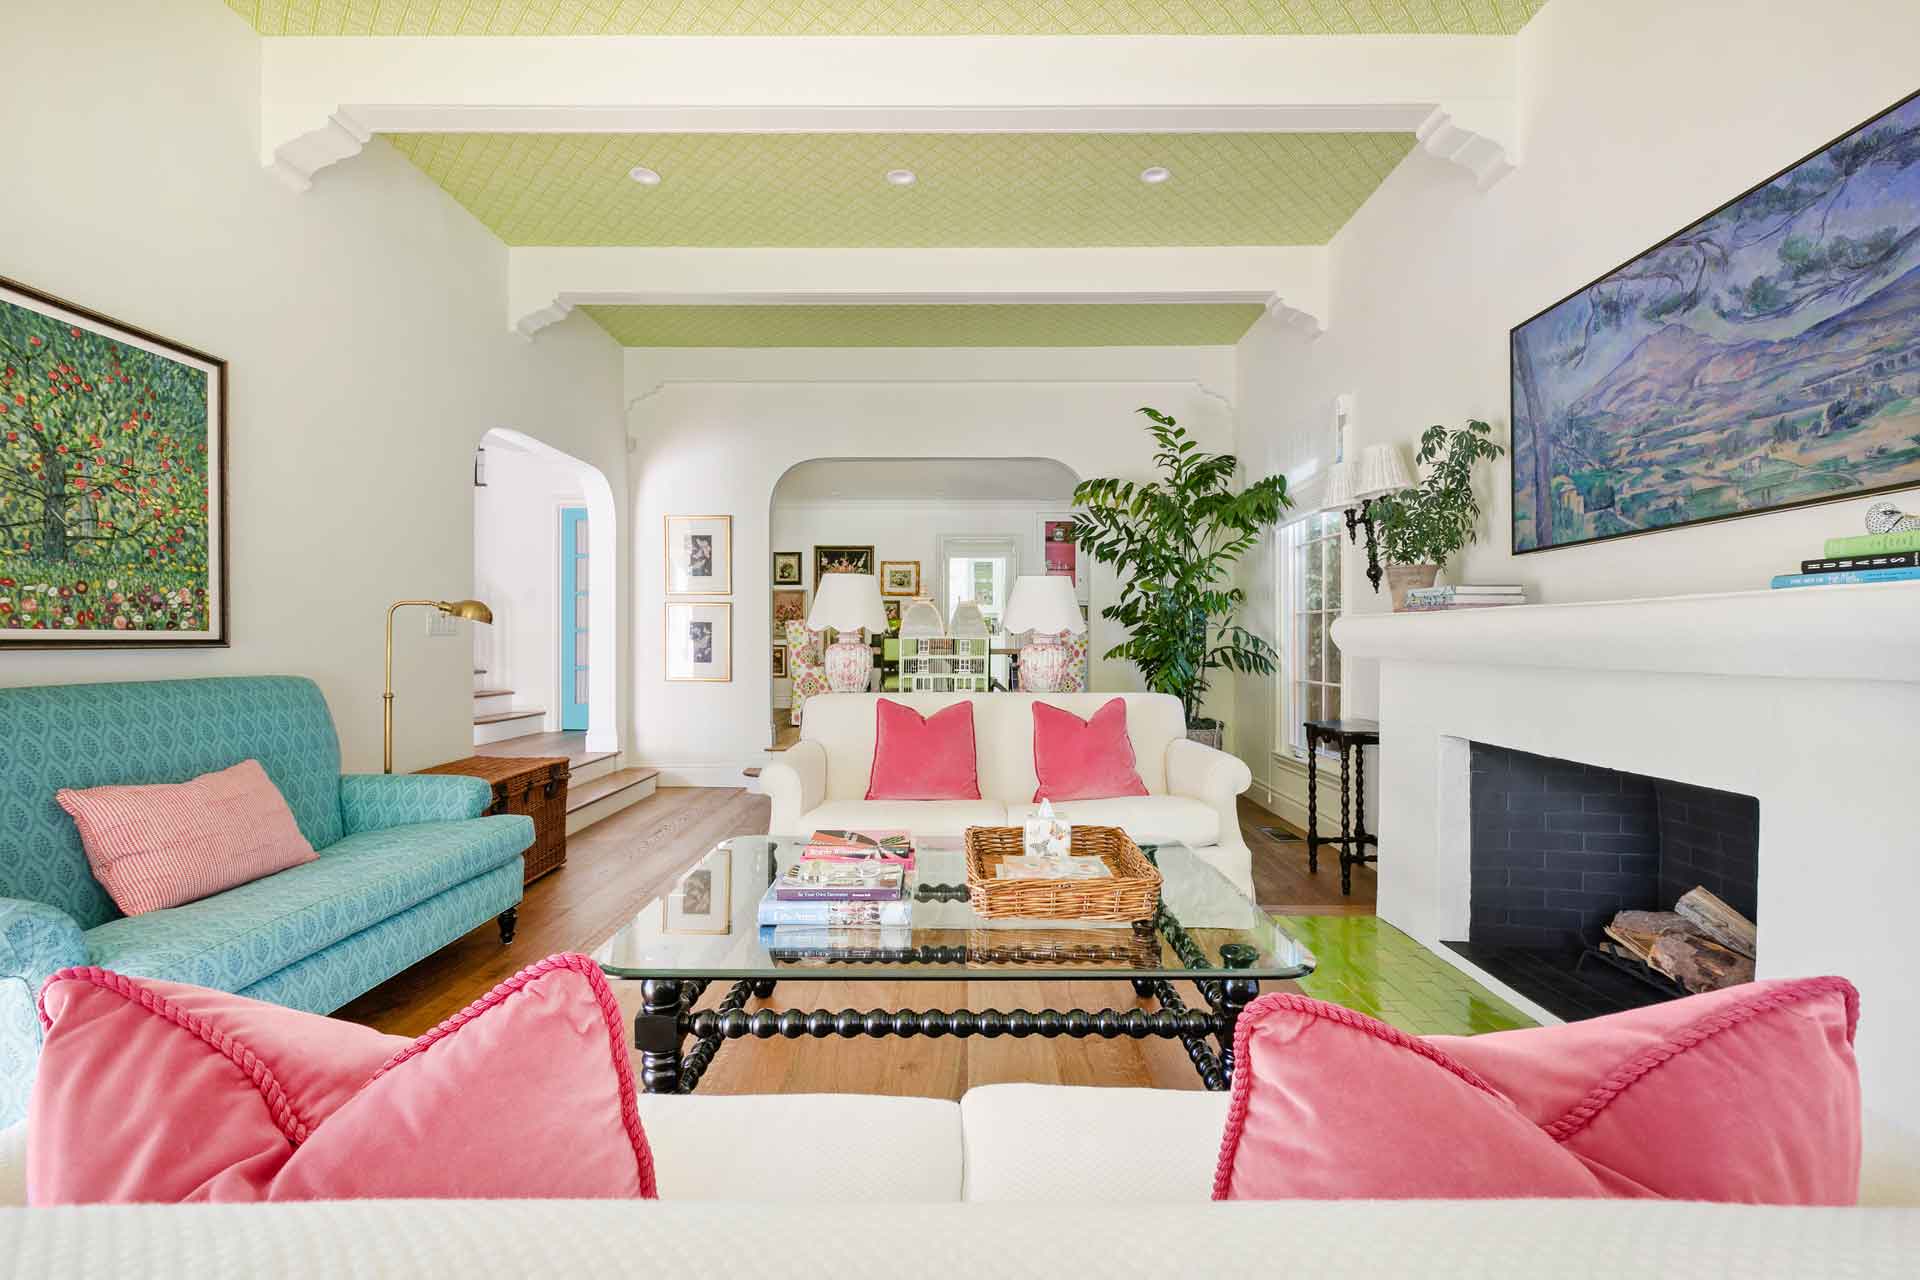 Living room with white sofas, pink cushions and a patterned green ceiling